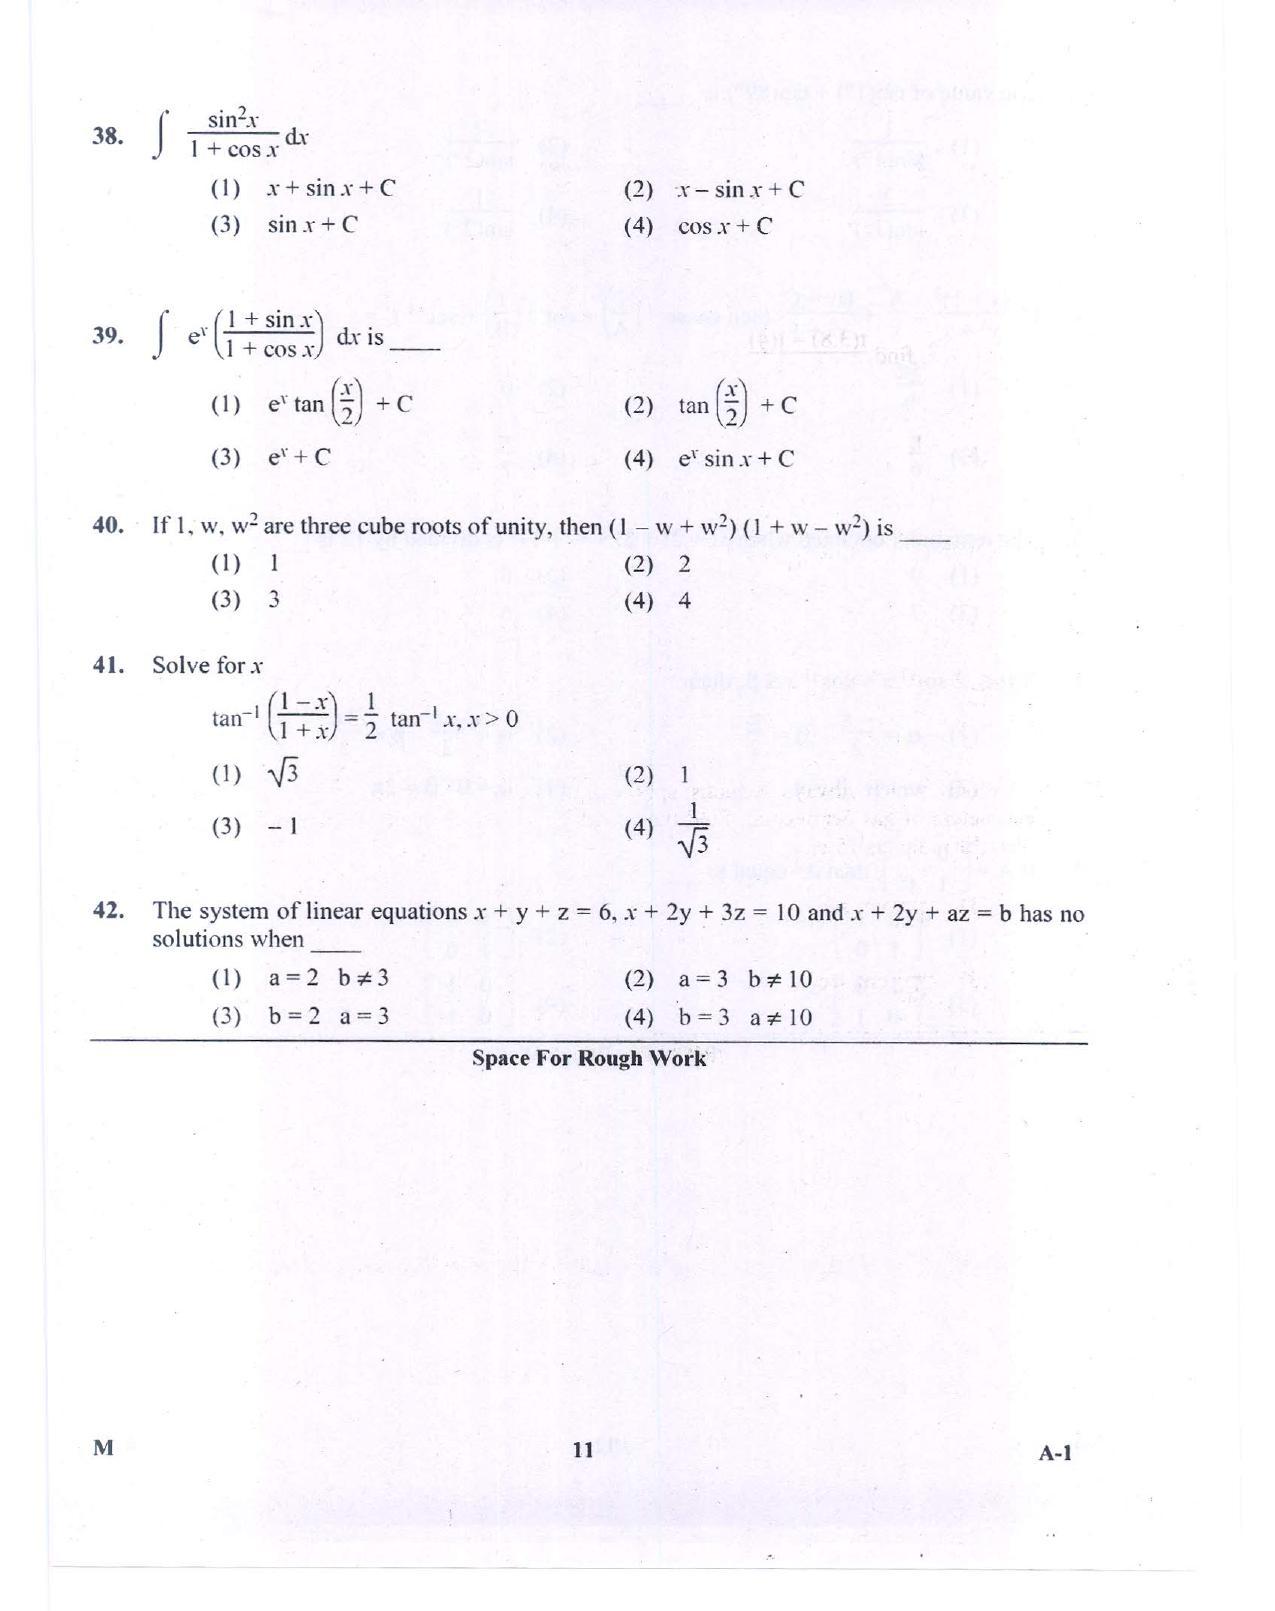 KCET Mathematics 2015 Question Papers - Page 11